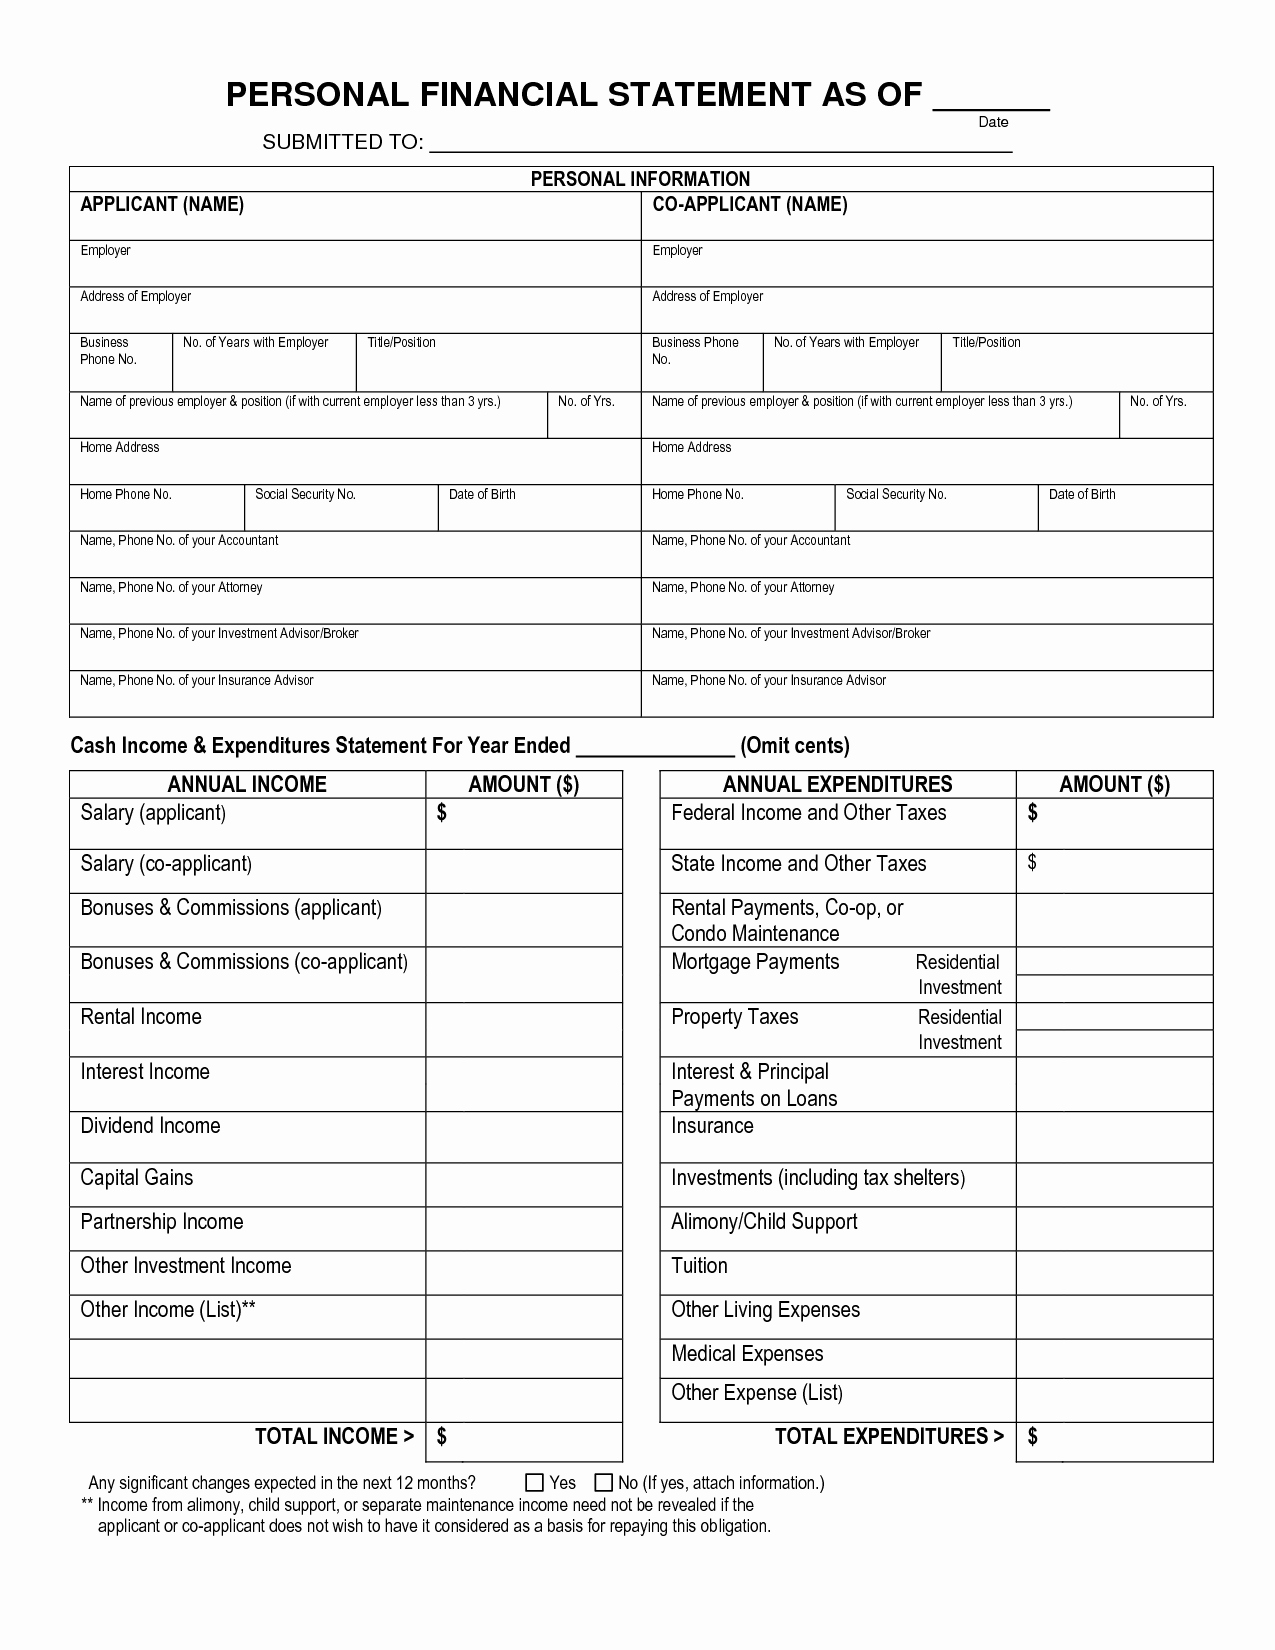 Financial Statements Template Pdf Inspirational Free Printable Personal Financial Statement